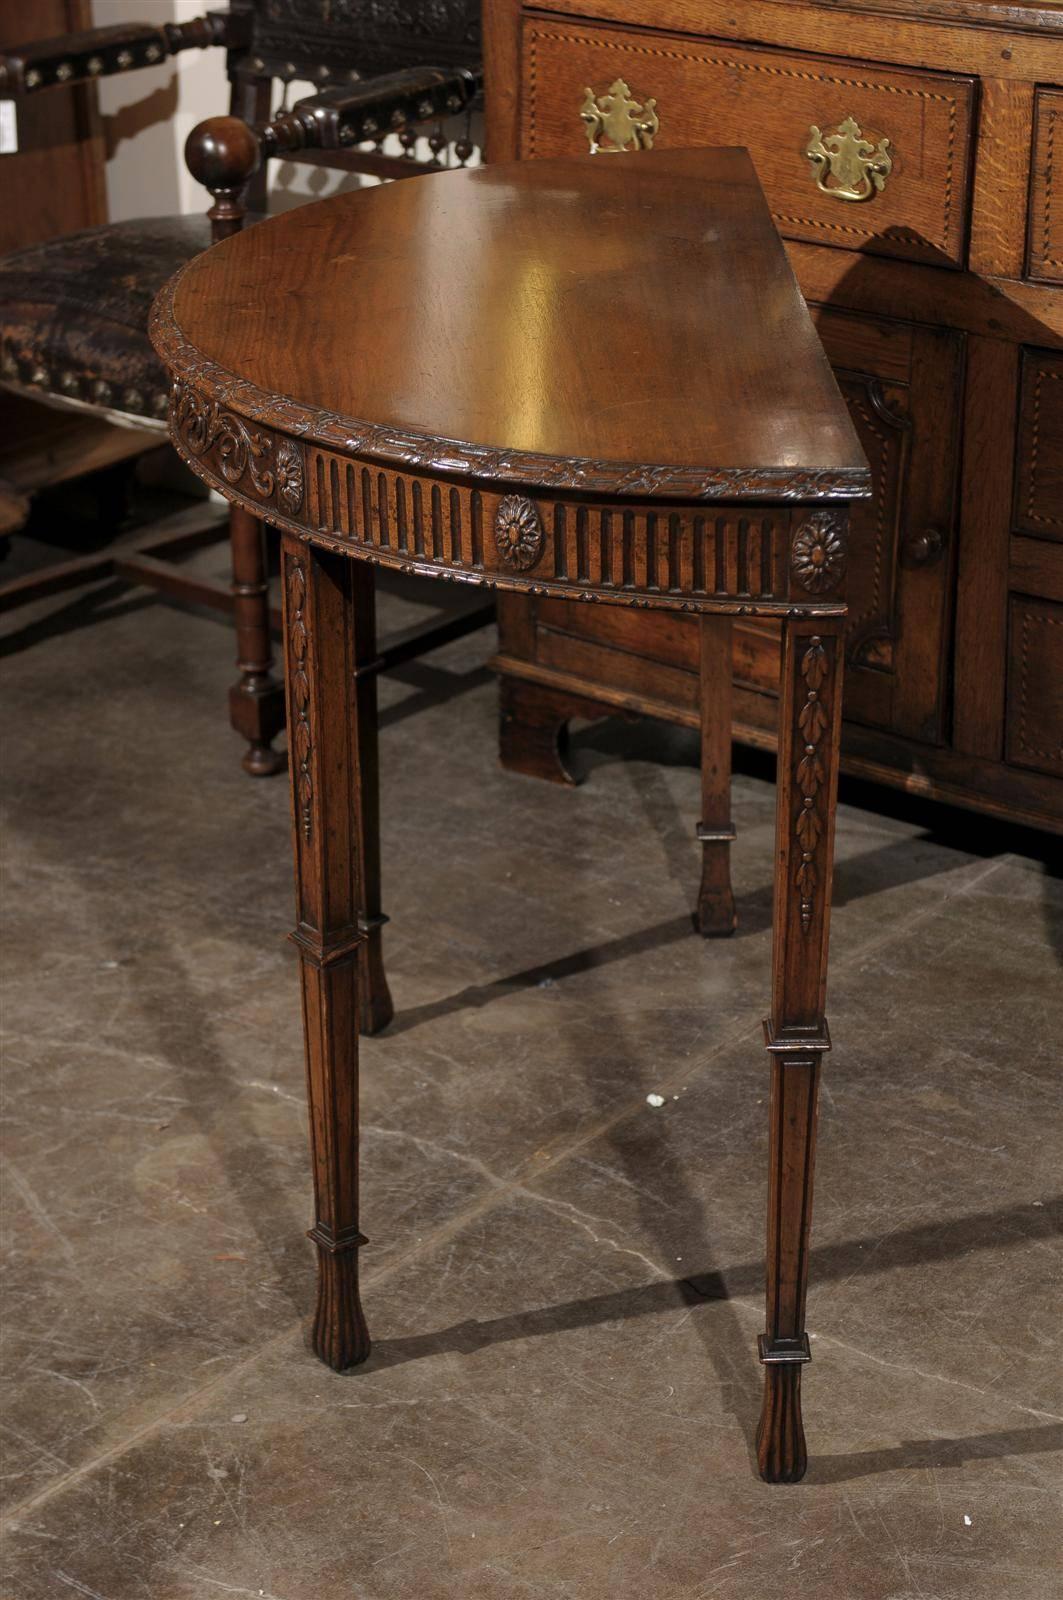 20th Century English Turn of the Century Wooden Demi-Lune Table with Carved Apron For Sale